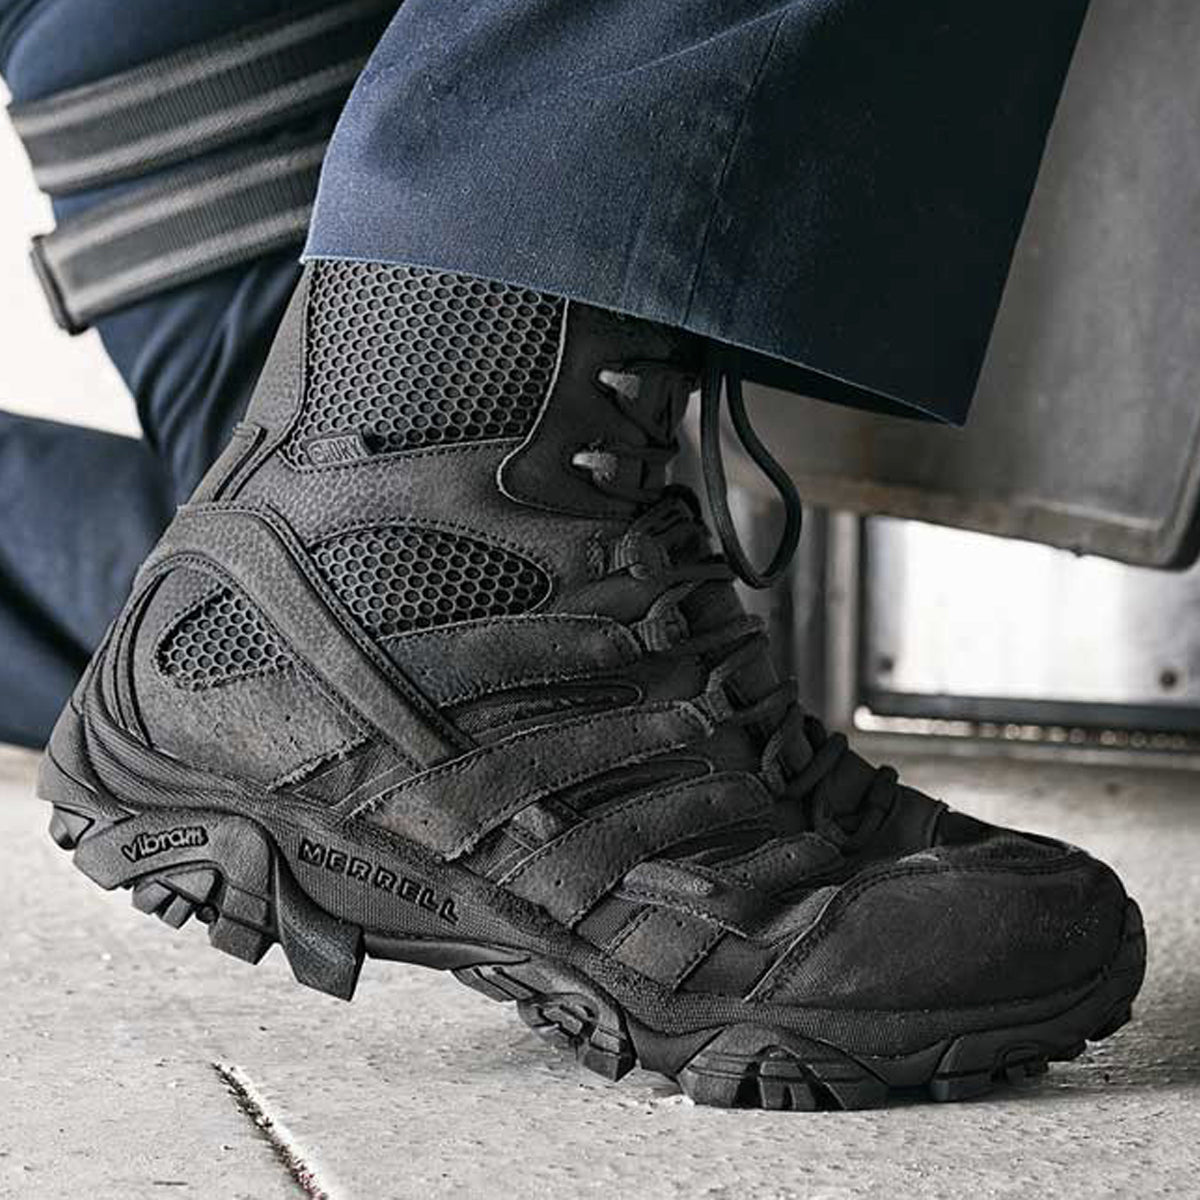 Why You Need the Merrell MOAB 2 Tactical Boots!